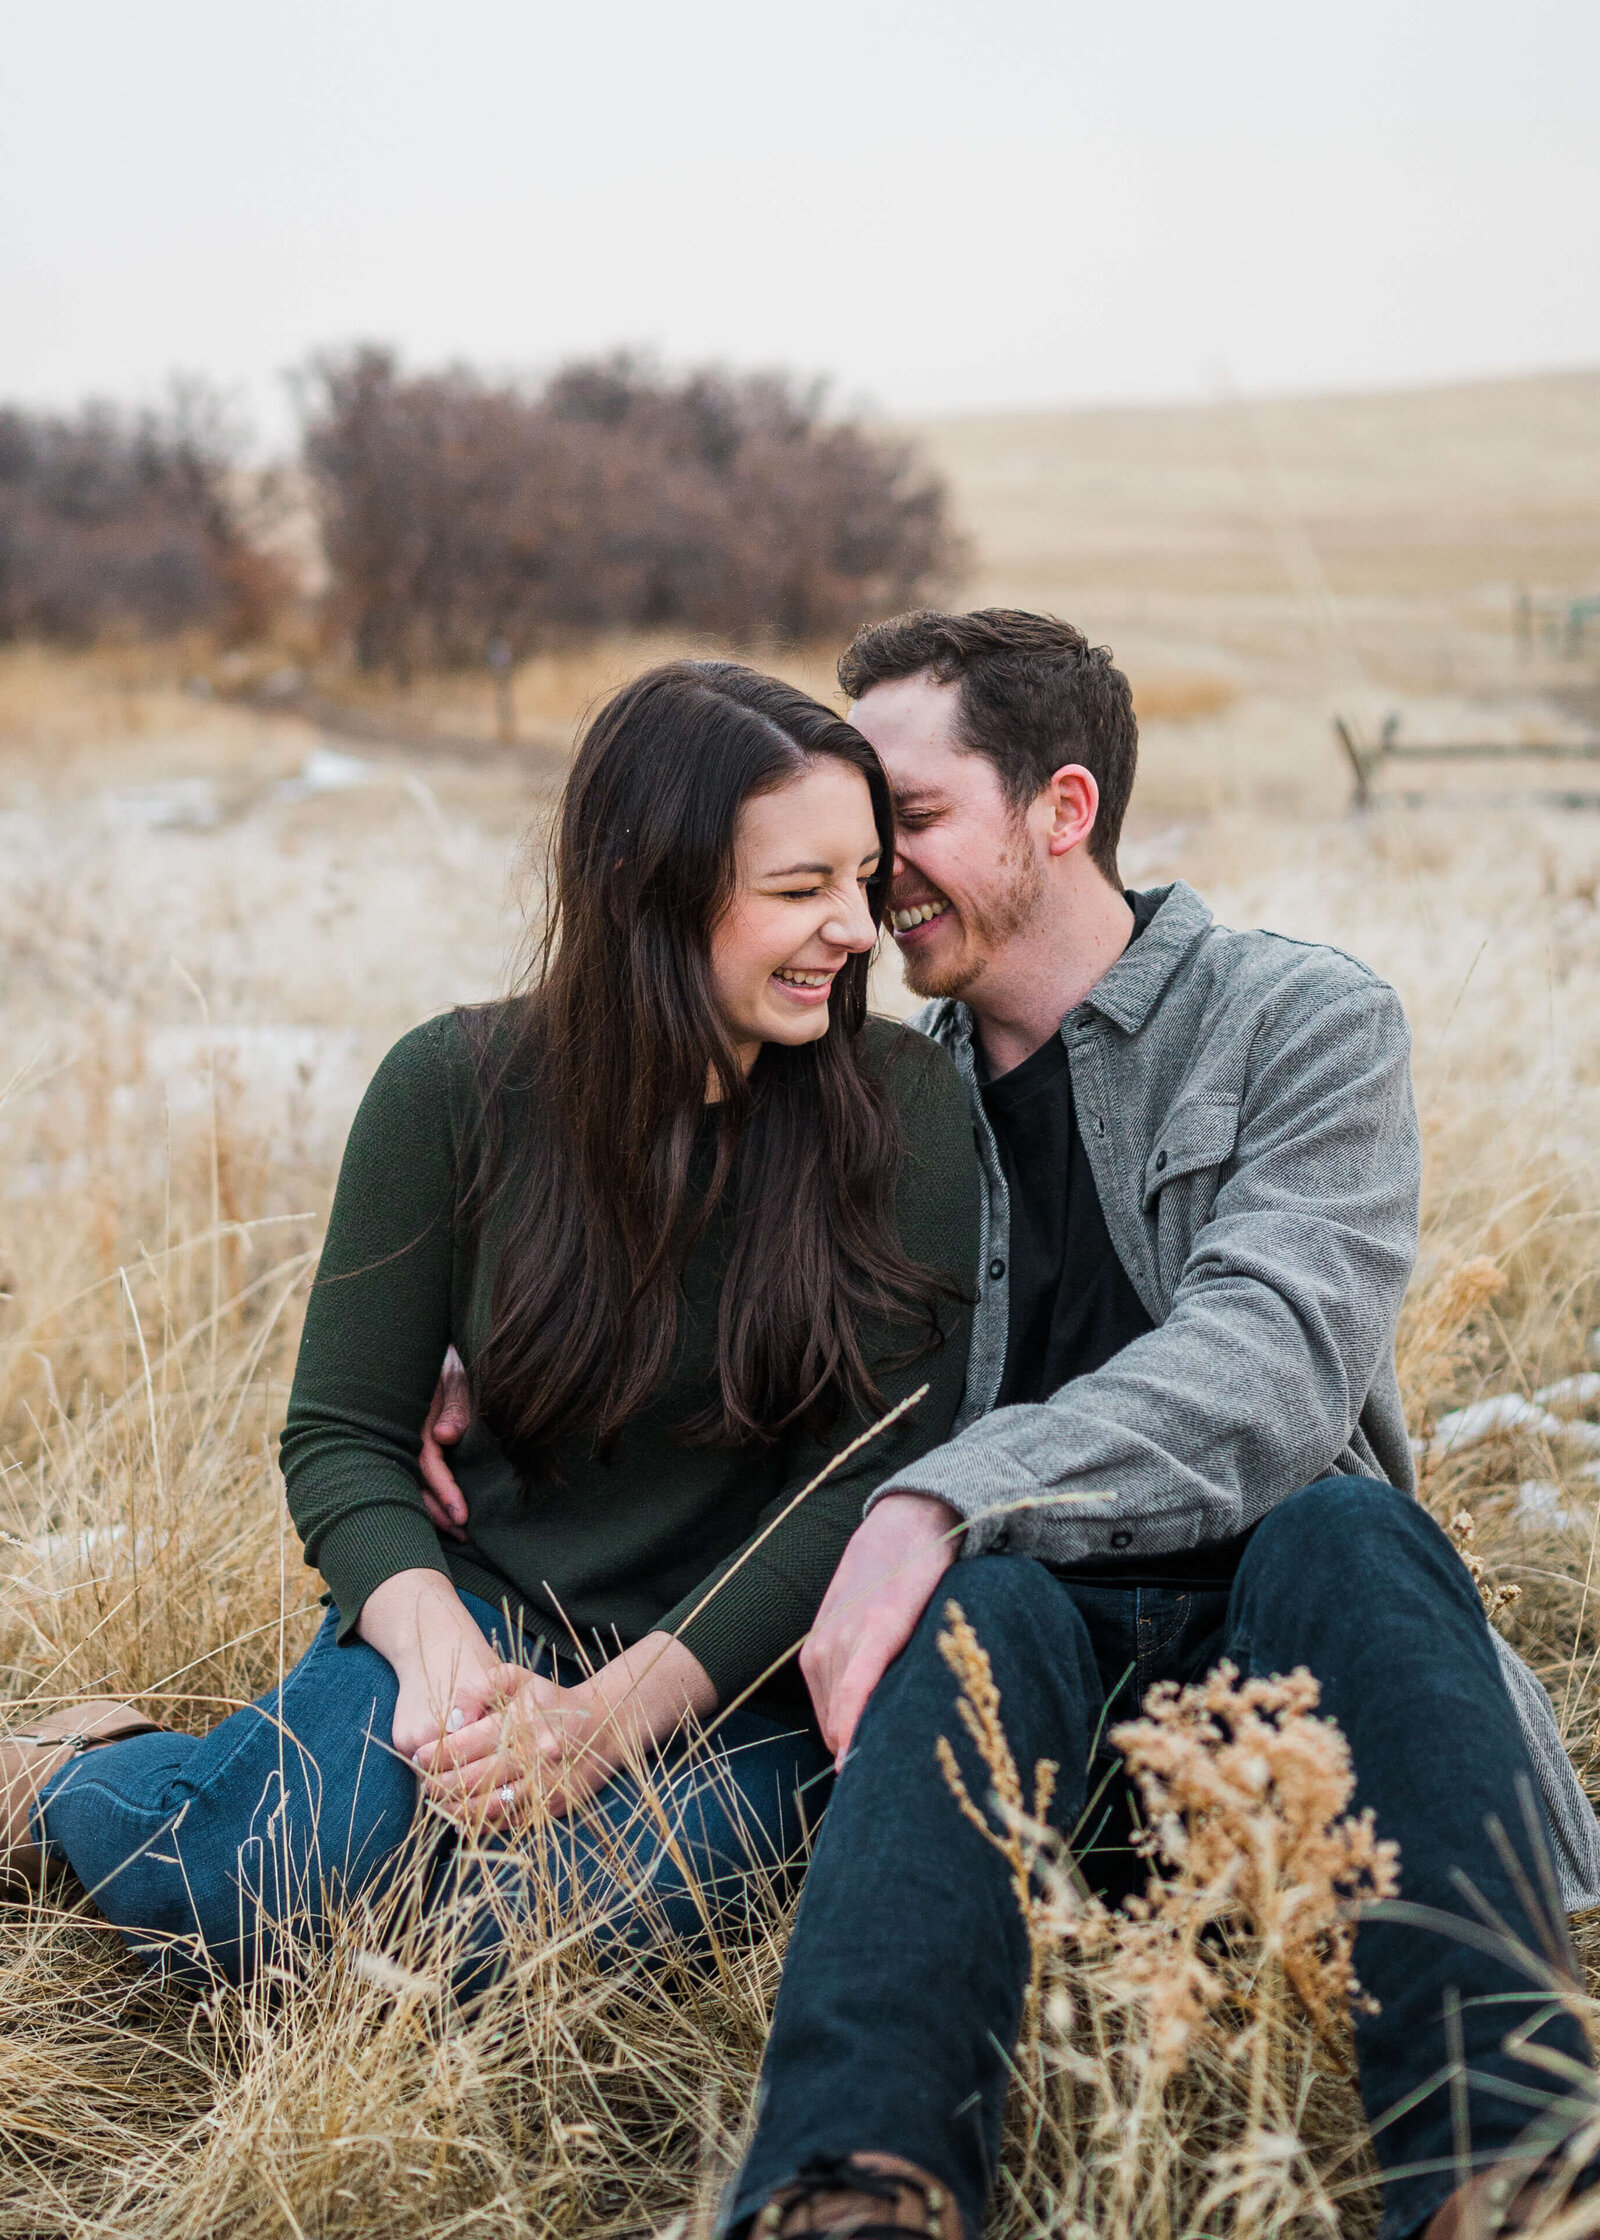 Woman and her fiance sitting in a field and laughing during engagement photo session